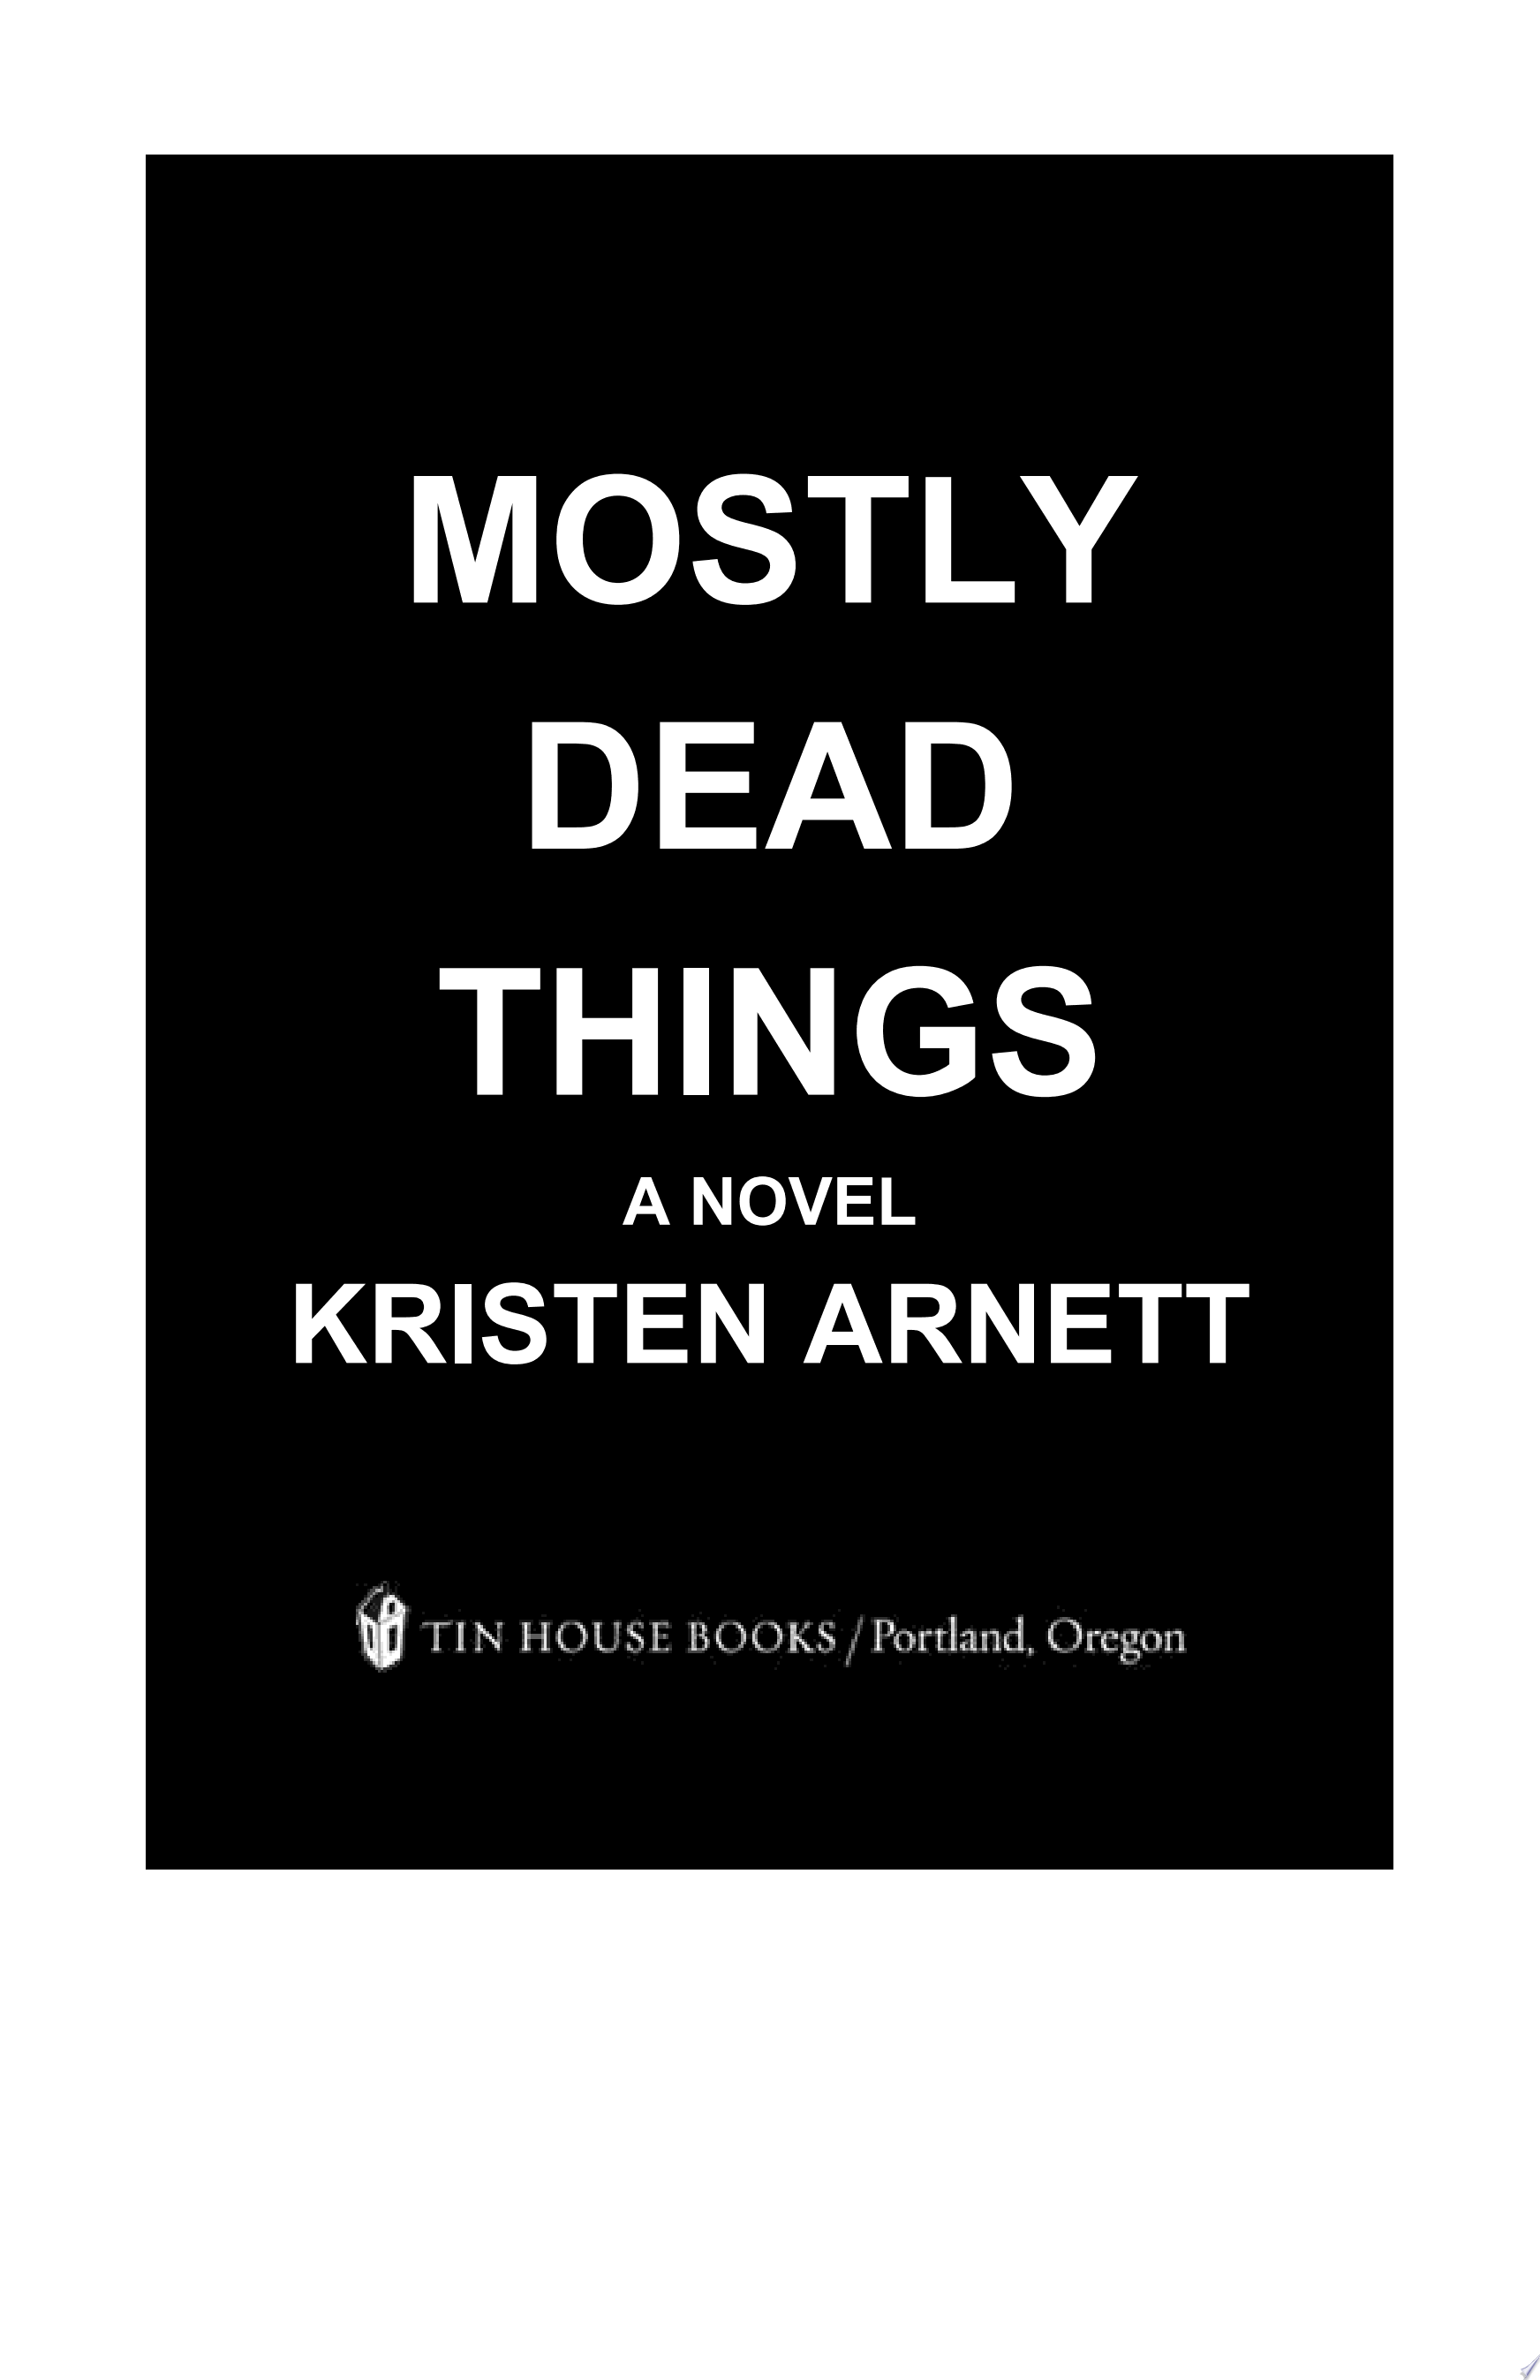 Image for "Mostly Dead Things"